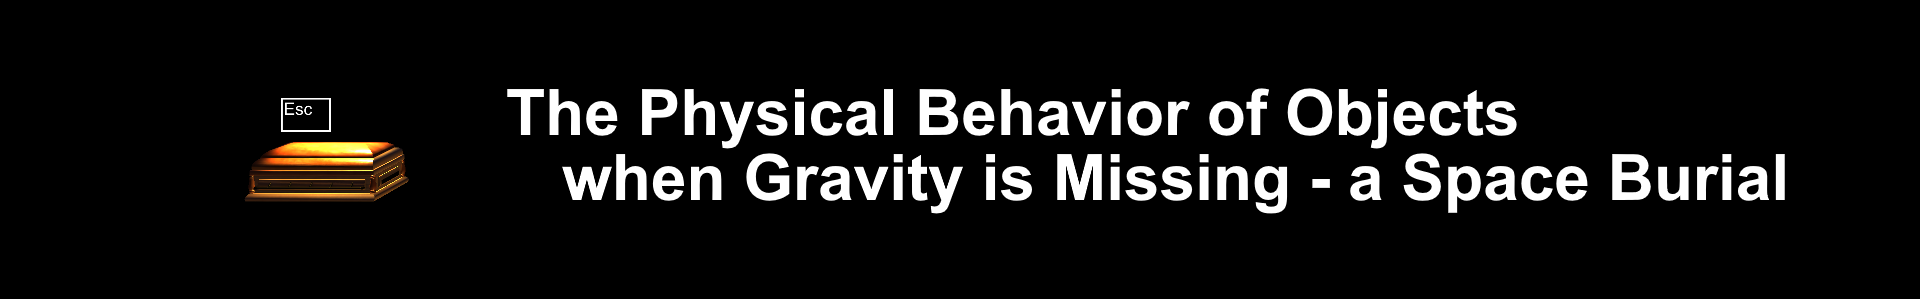 The Physical Behavior of Objects when Gravity is Missing - a Space Burial